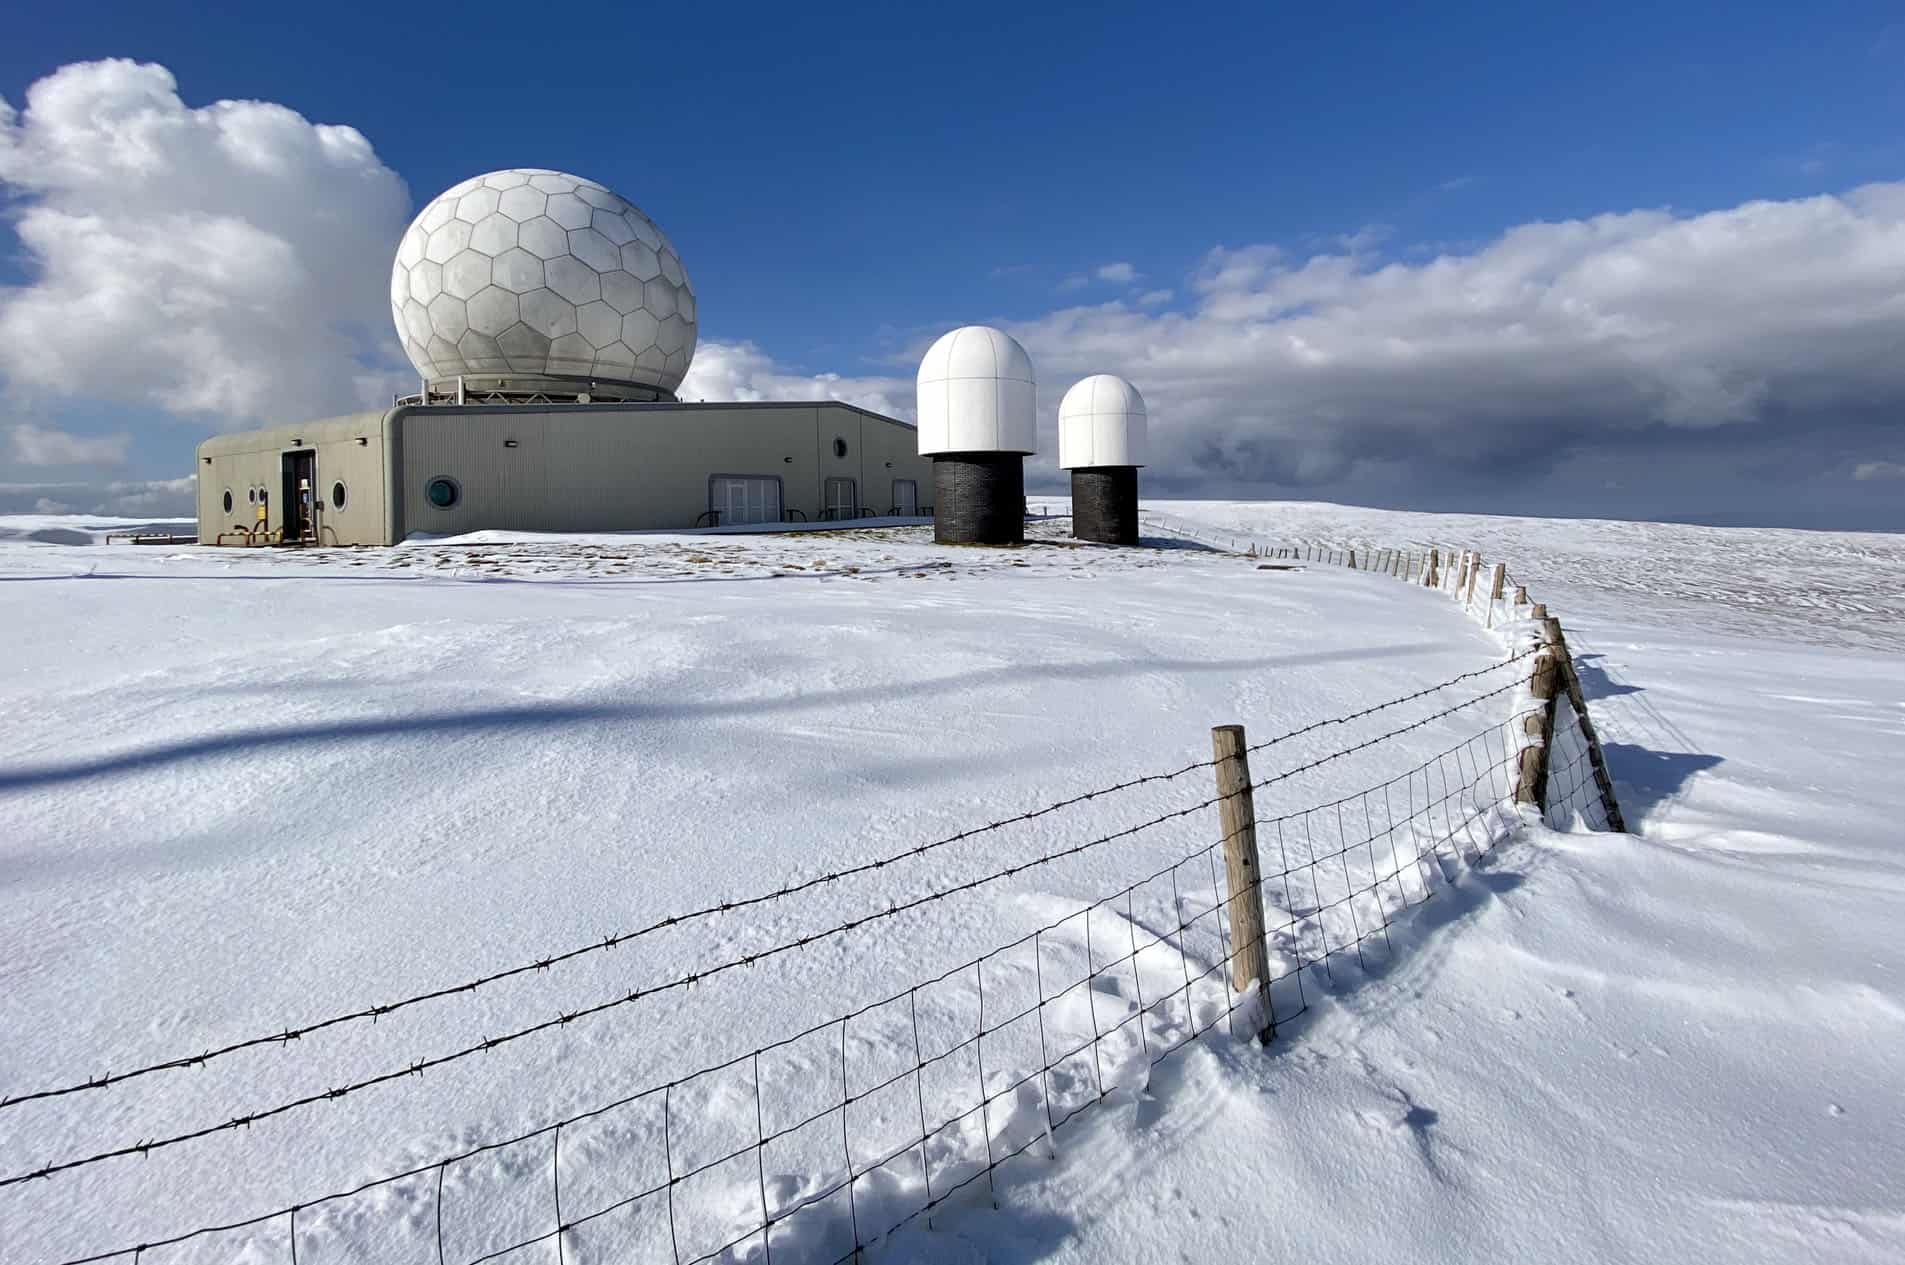 A few pictures of the radar station at the top of Great Dun Fell, height 848 metres (2782 feet).